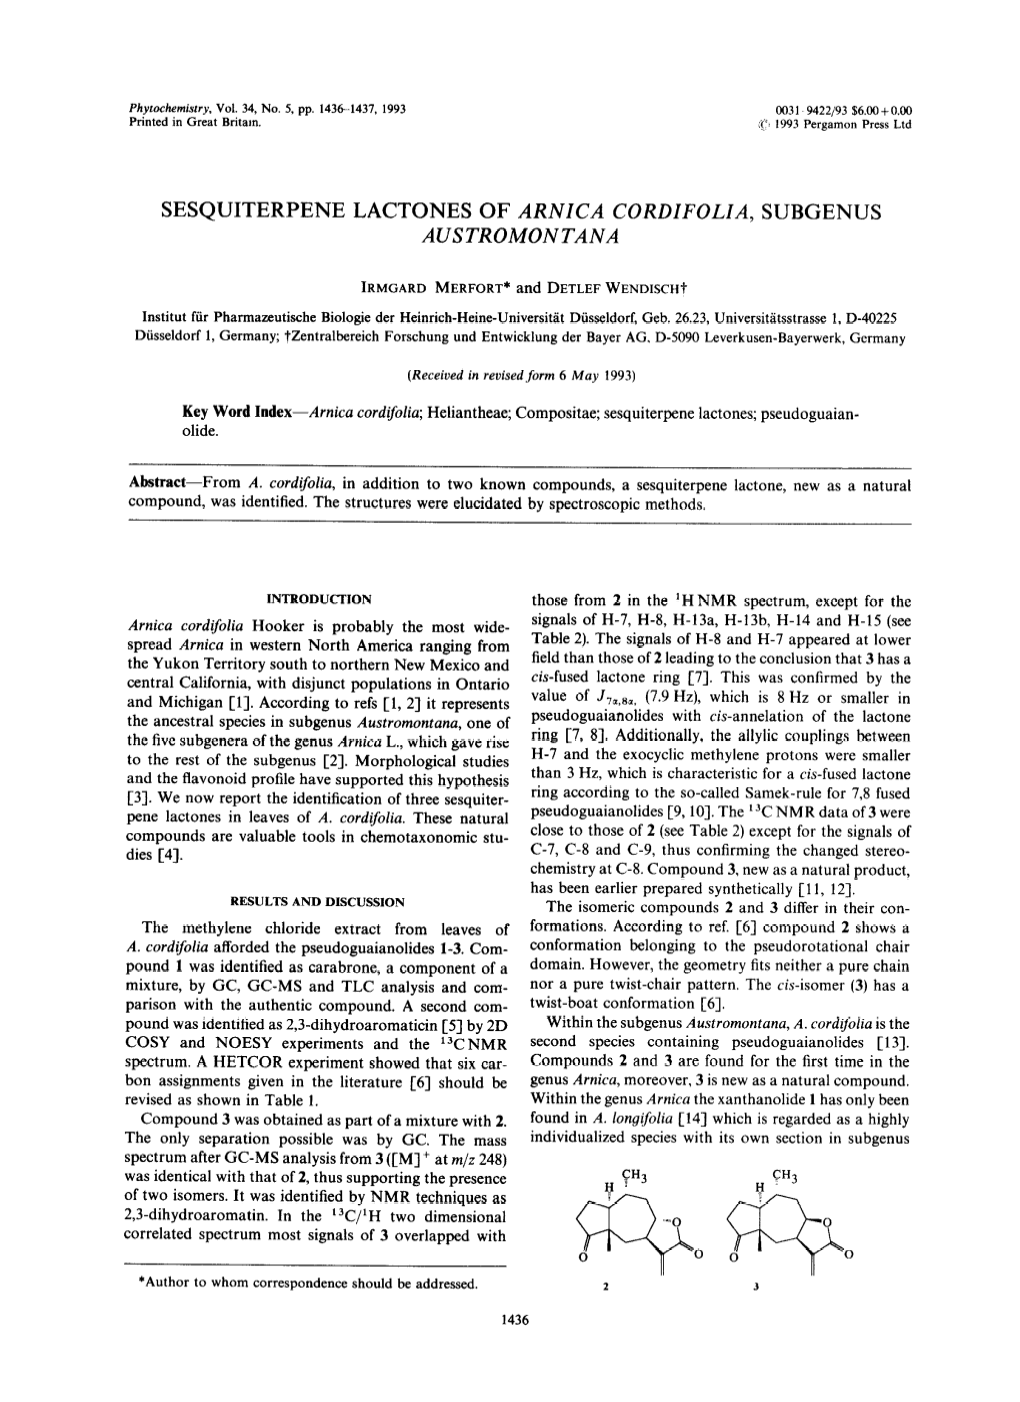 A 1,5-Cis-Guaianolide Glucoside from Flowers of Arnica Mollis